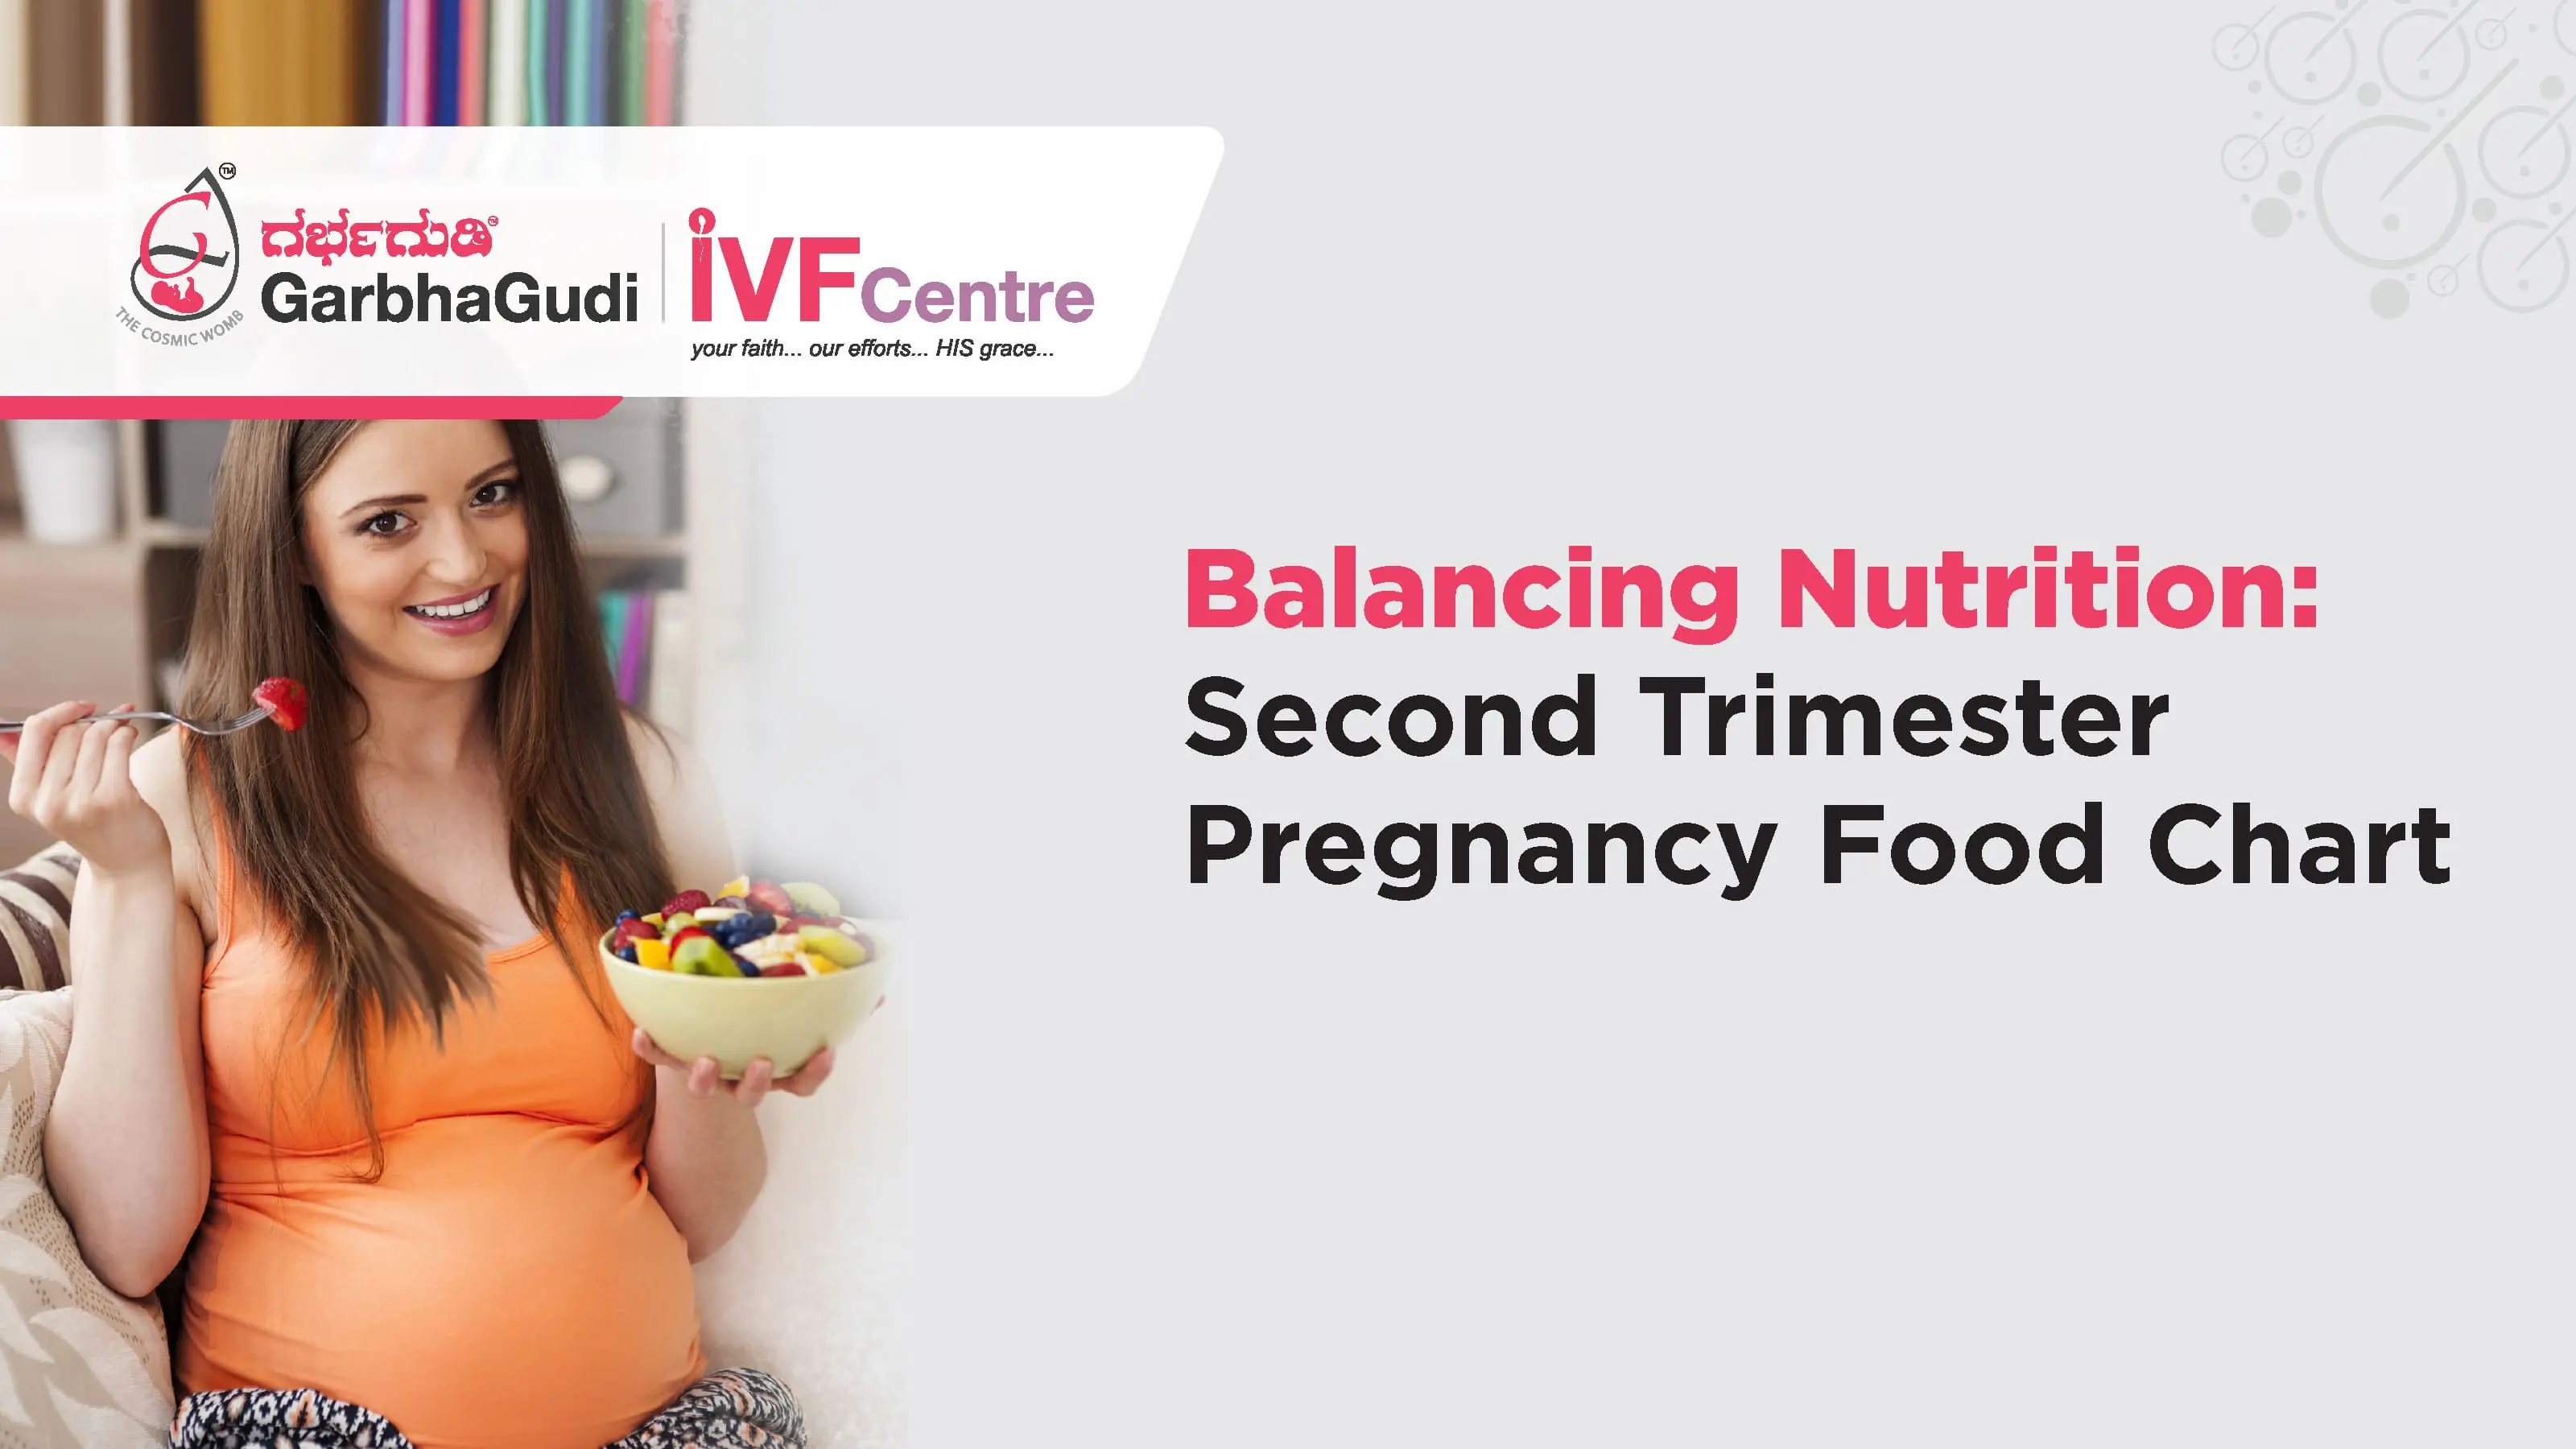 Balancing Nutrition: Second Trimester Pregnancy Food Chart